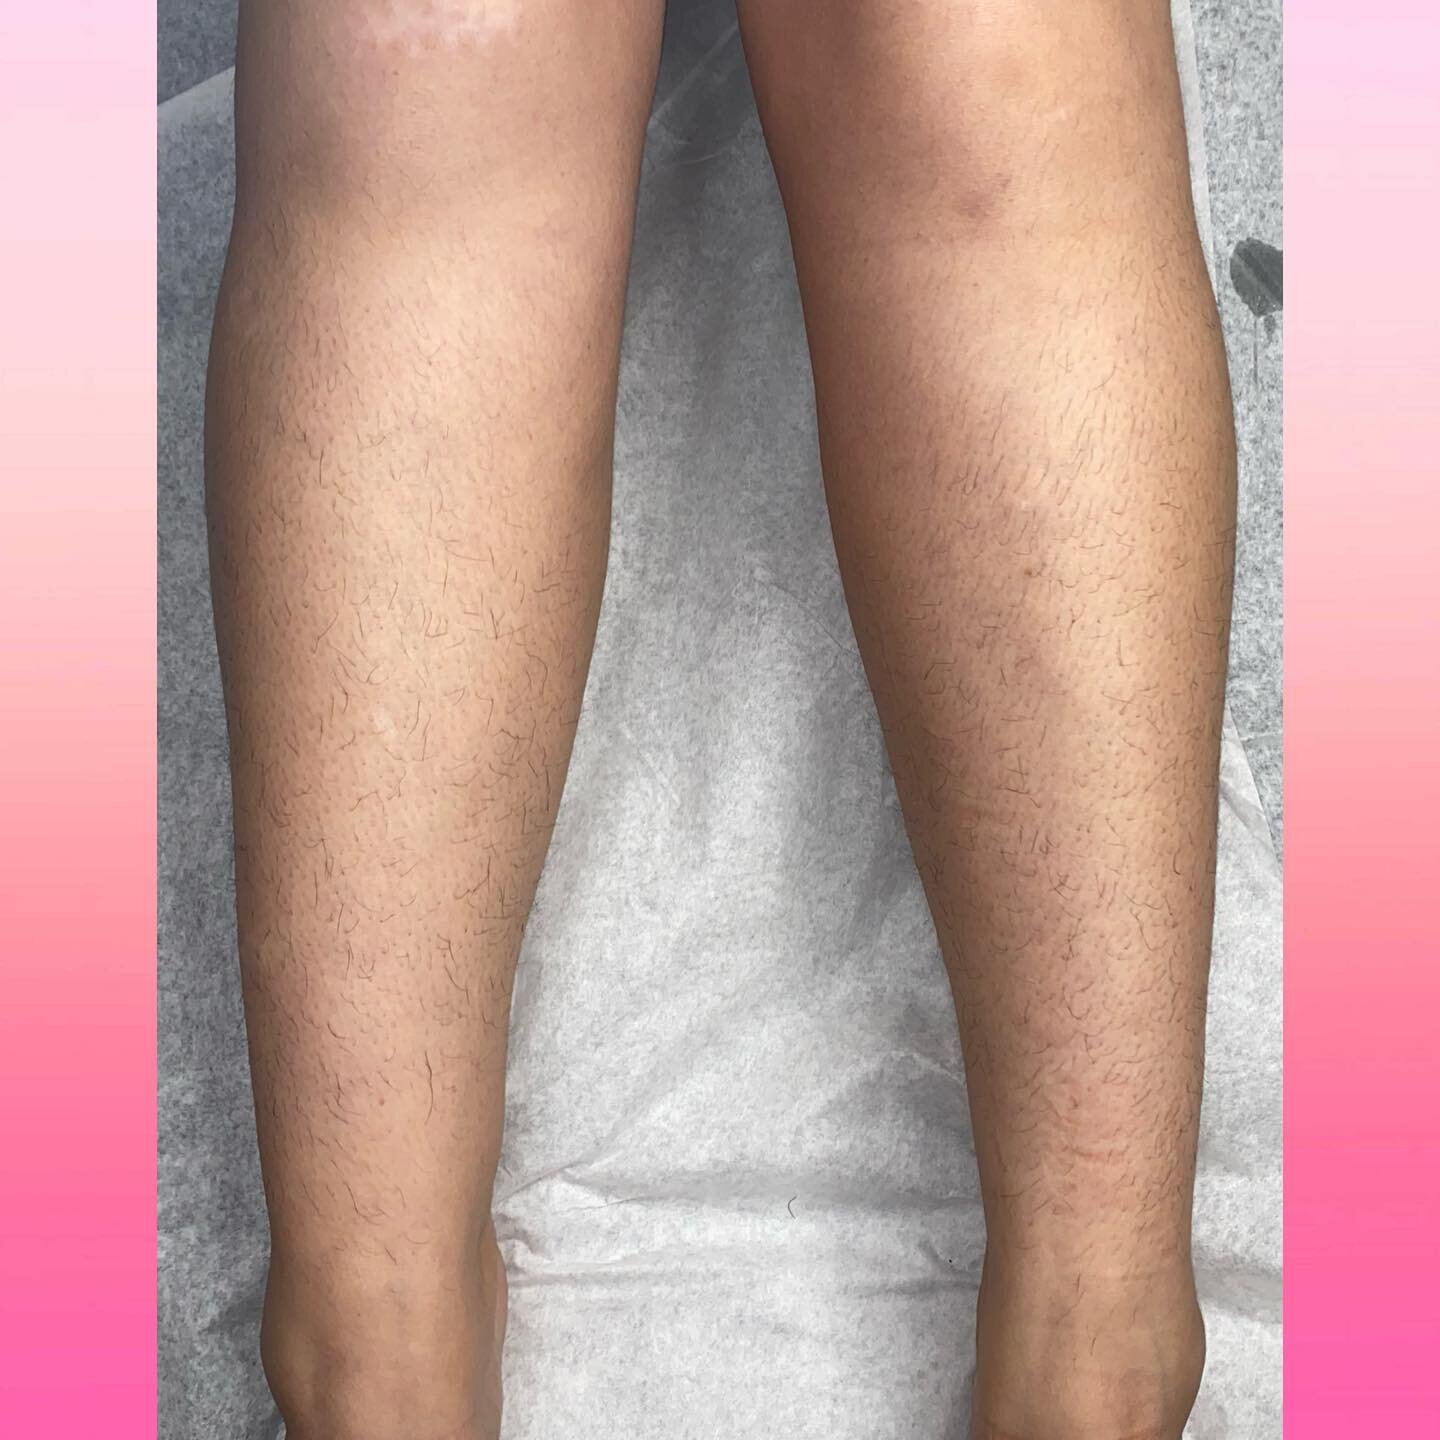 Before And After Lower Leg wax. Not A Hair In Sight!🤩 #lowerlegwax #waxing #losangeles #wax